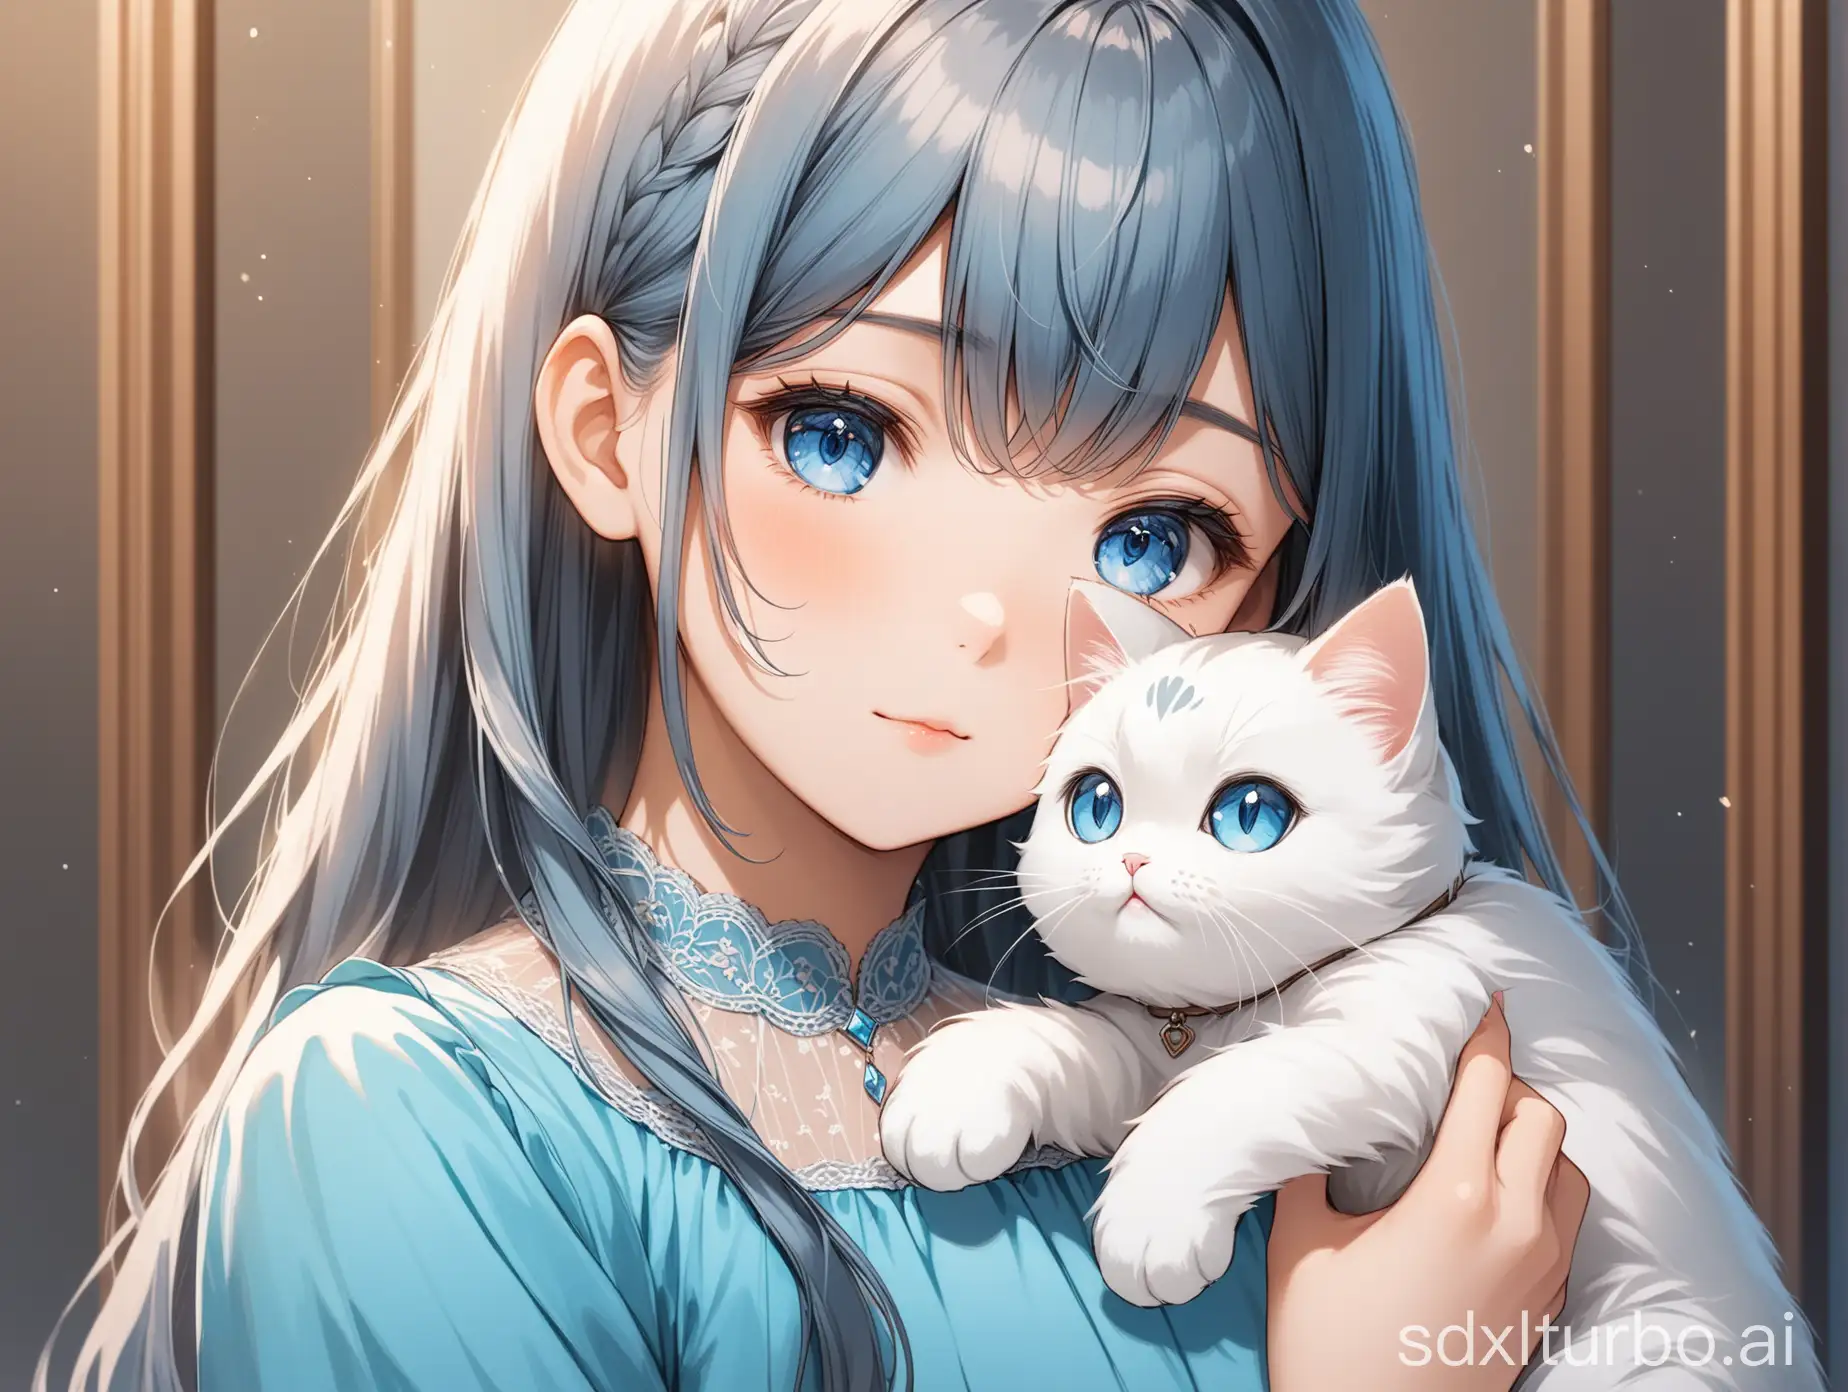 a girl in a blue dress holding a white and grey plush cat, both the girl and the cat are in the frame, master-level, high definition